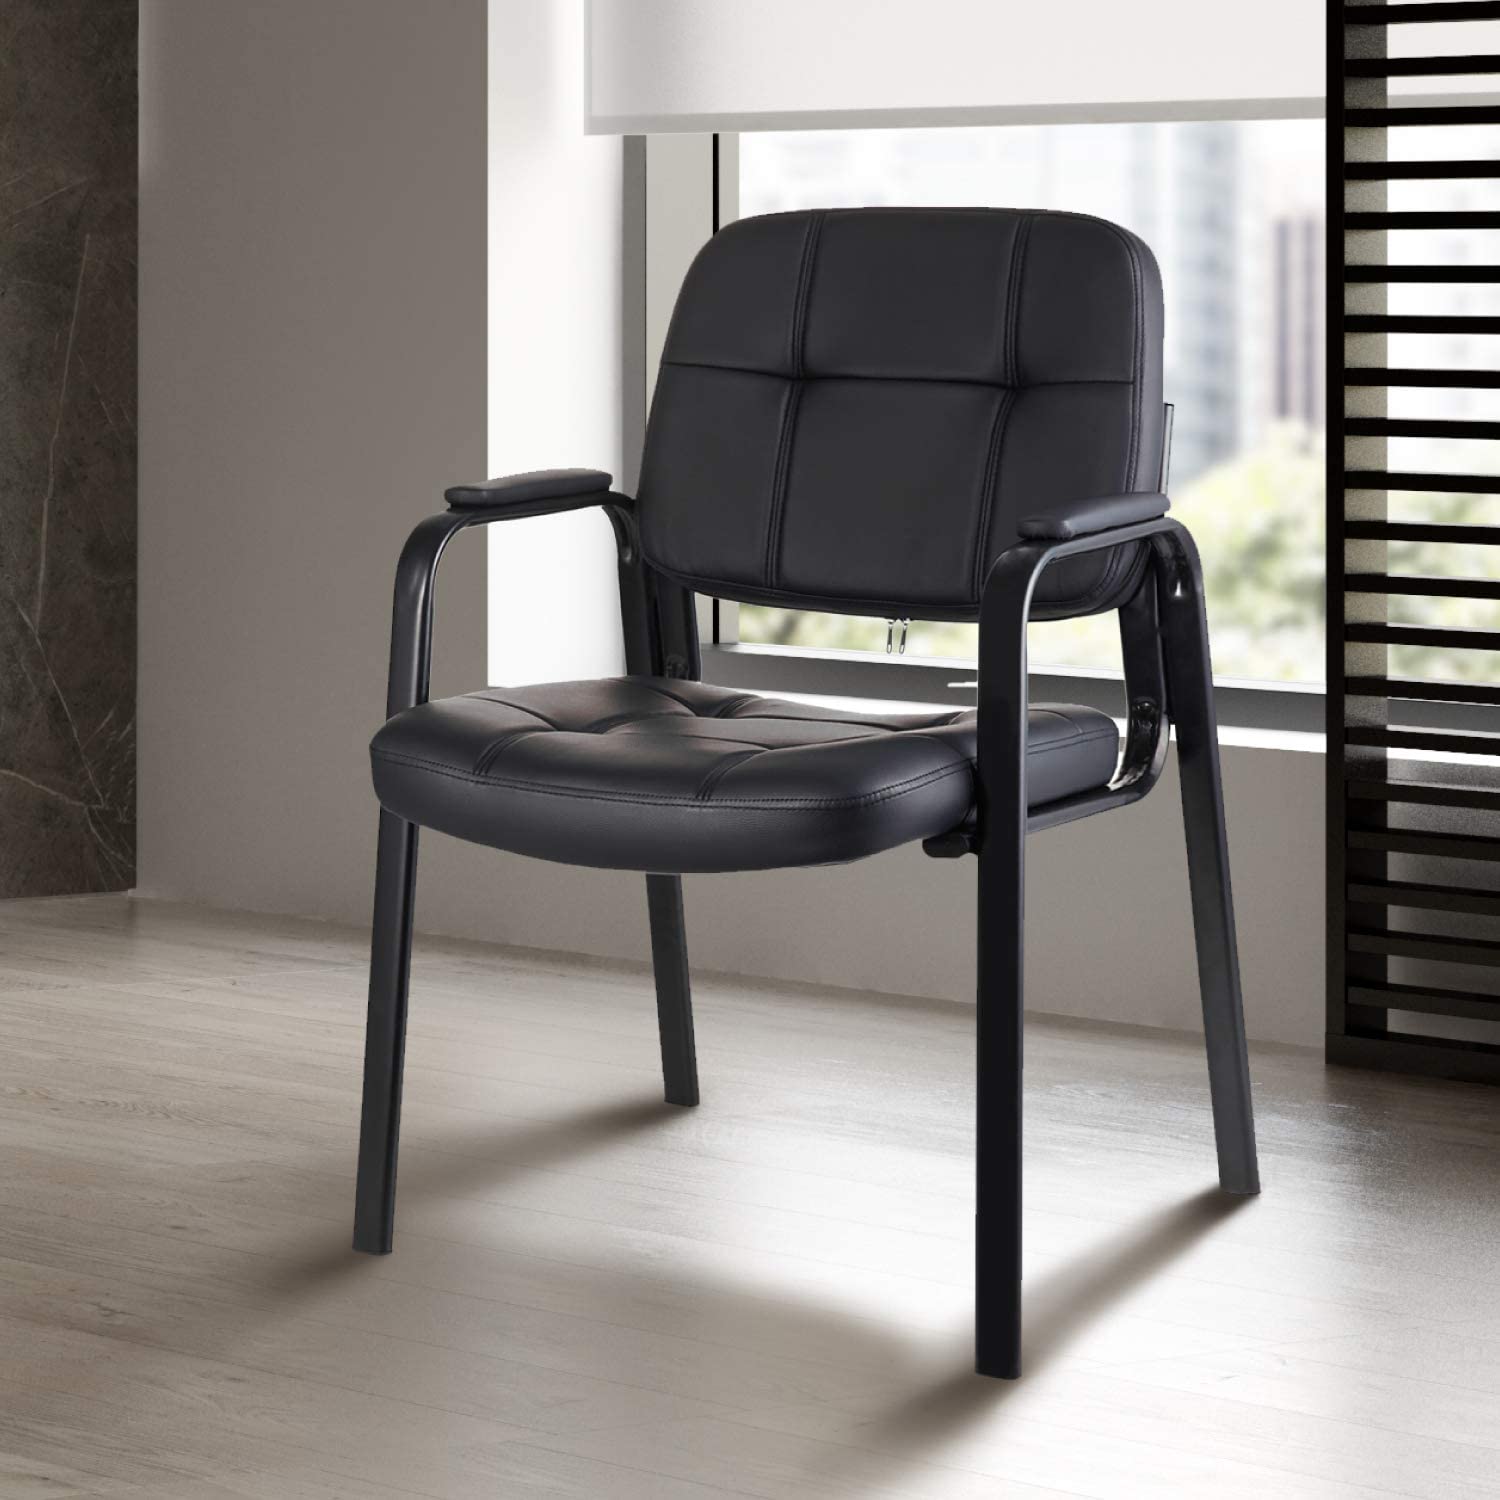 CLATINA Waiting Room Guest Chair with Bonded Leather Padded Arm Rest for Office Reception Black 2Pack - image 2 of 6